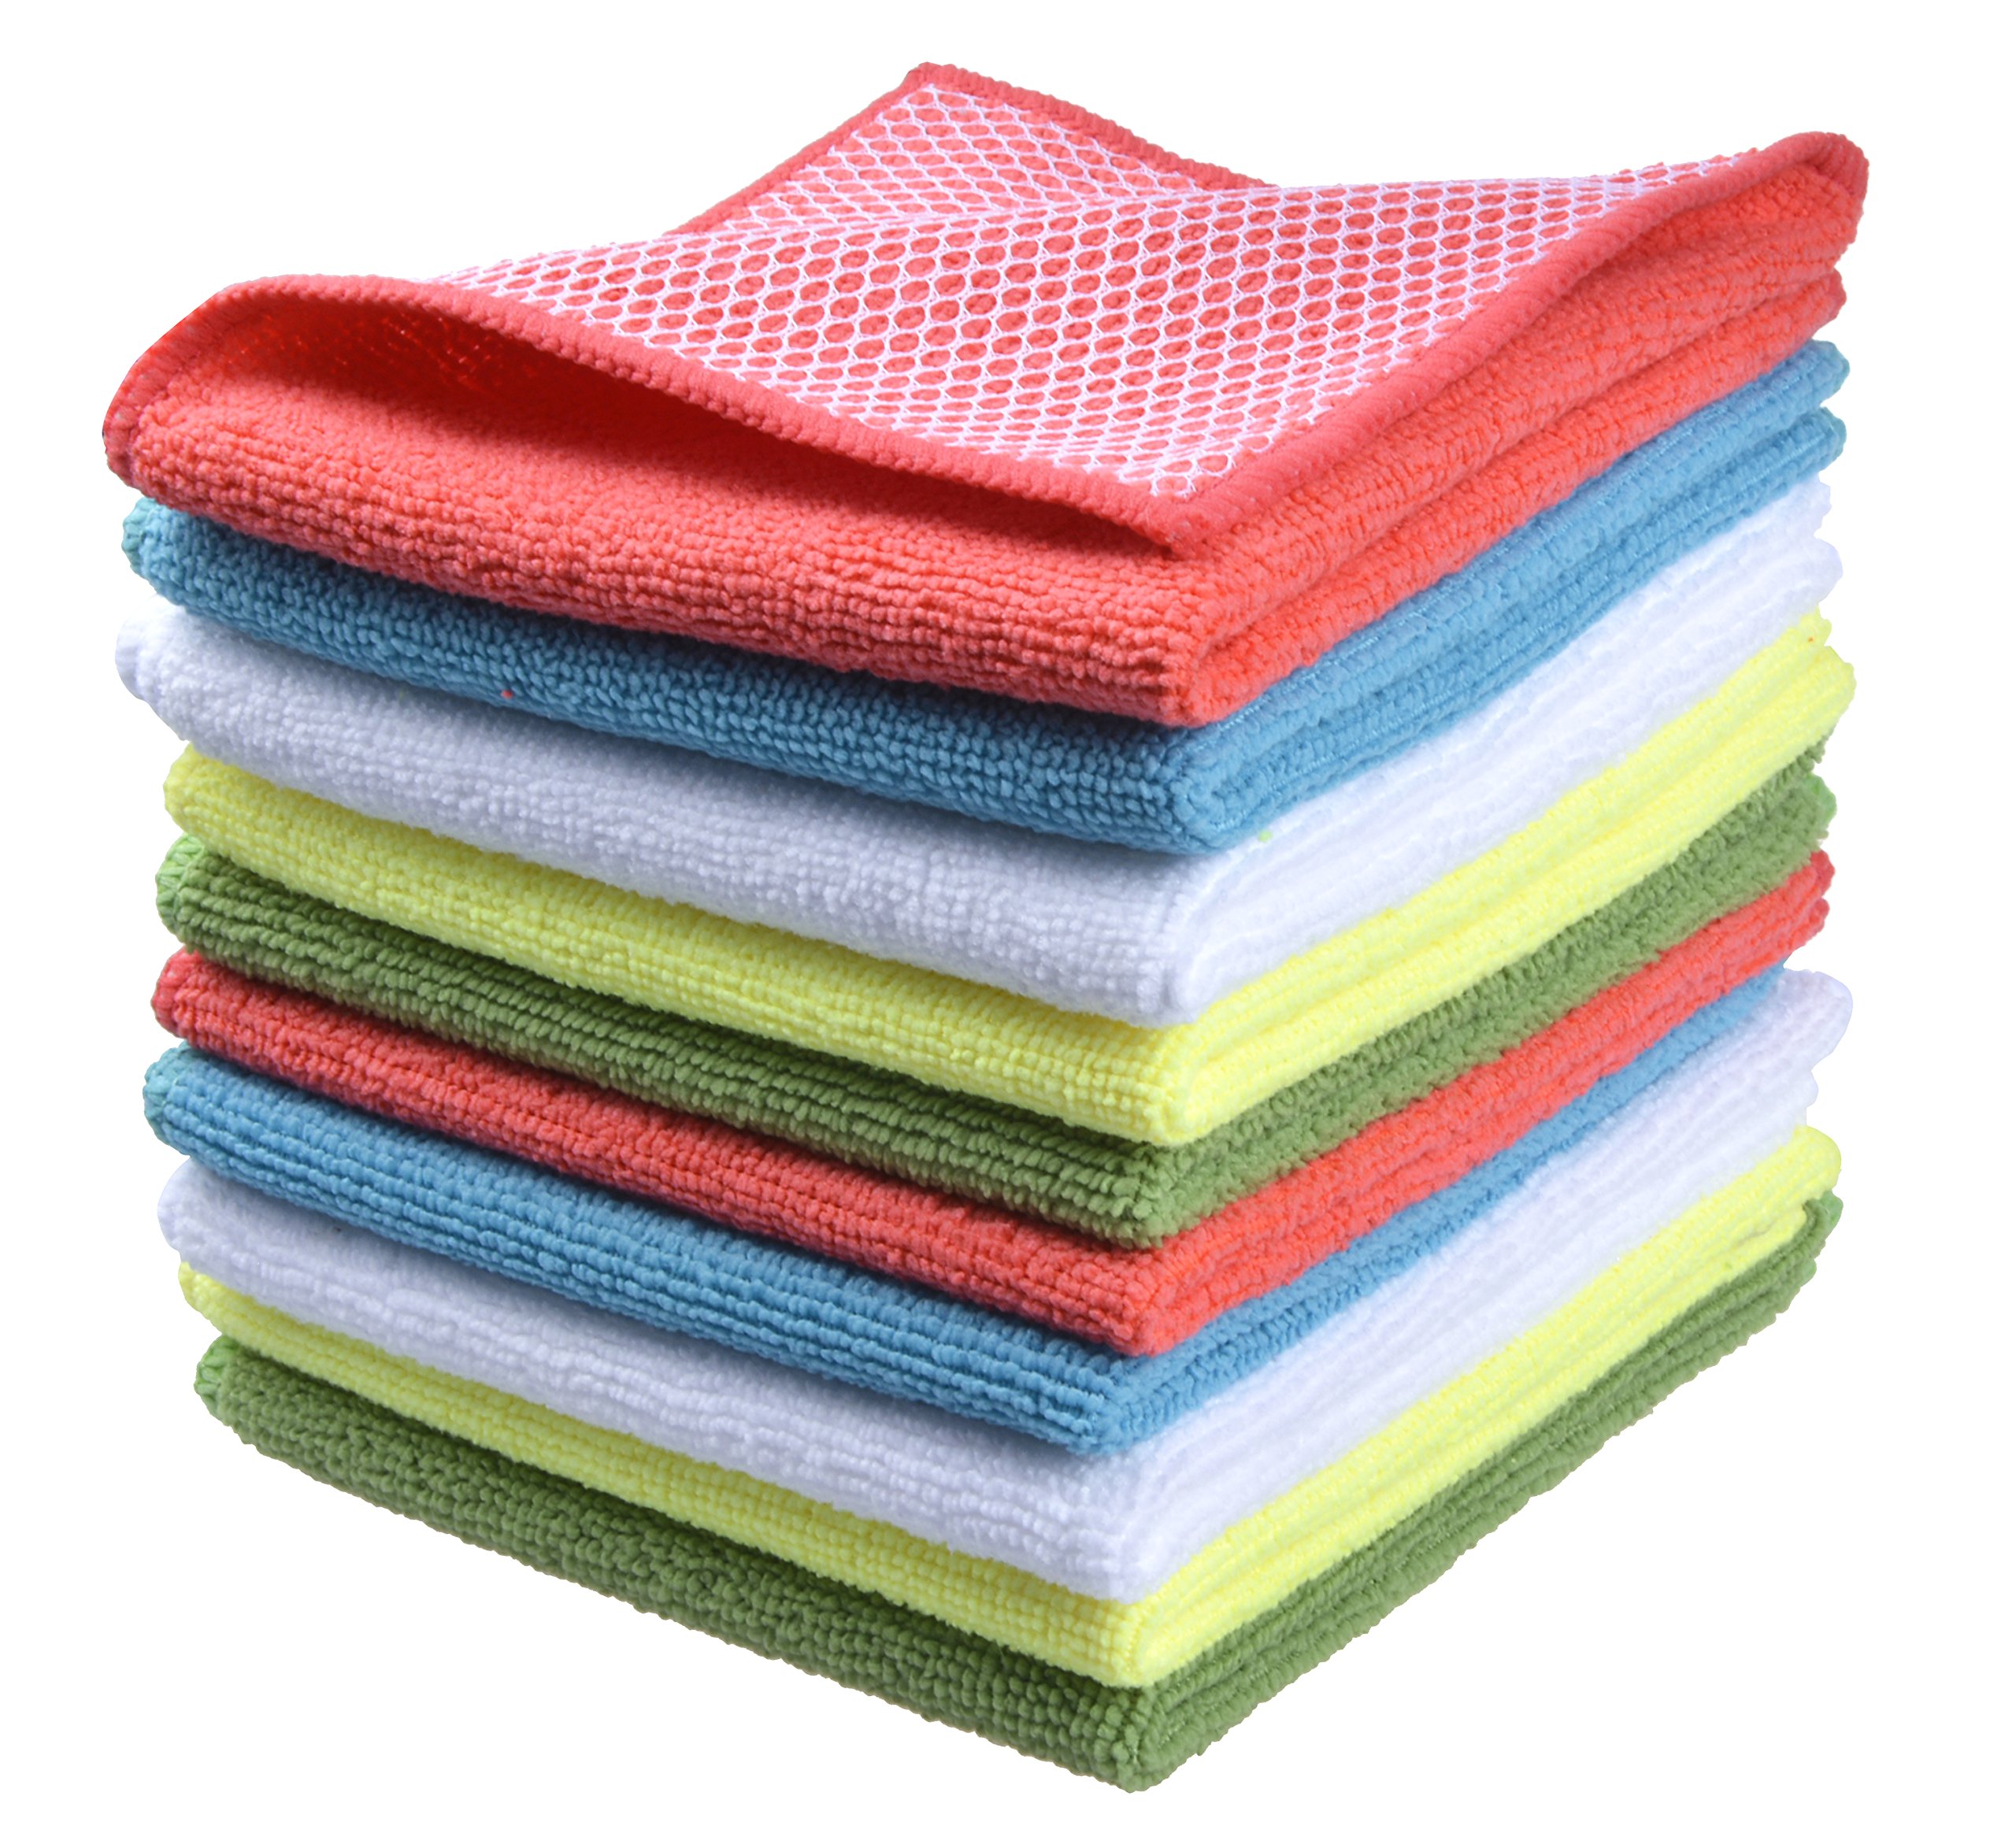 SINLAND Microfiber Dish Cloth for Washing Dishes Dish Rags Best Kitchen Washcloth  Cleaning Cloths with Poly Scour Side 5 Color Assorted 12inchx12inch 10pack  Assorted Color 12inchx12inch 10pack